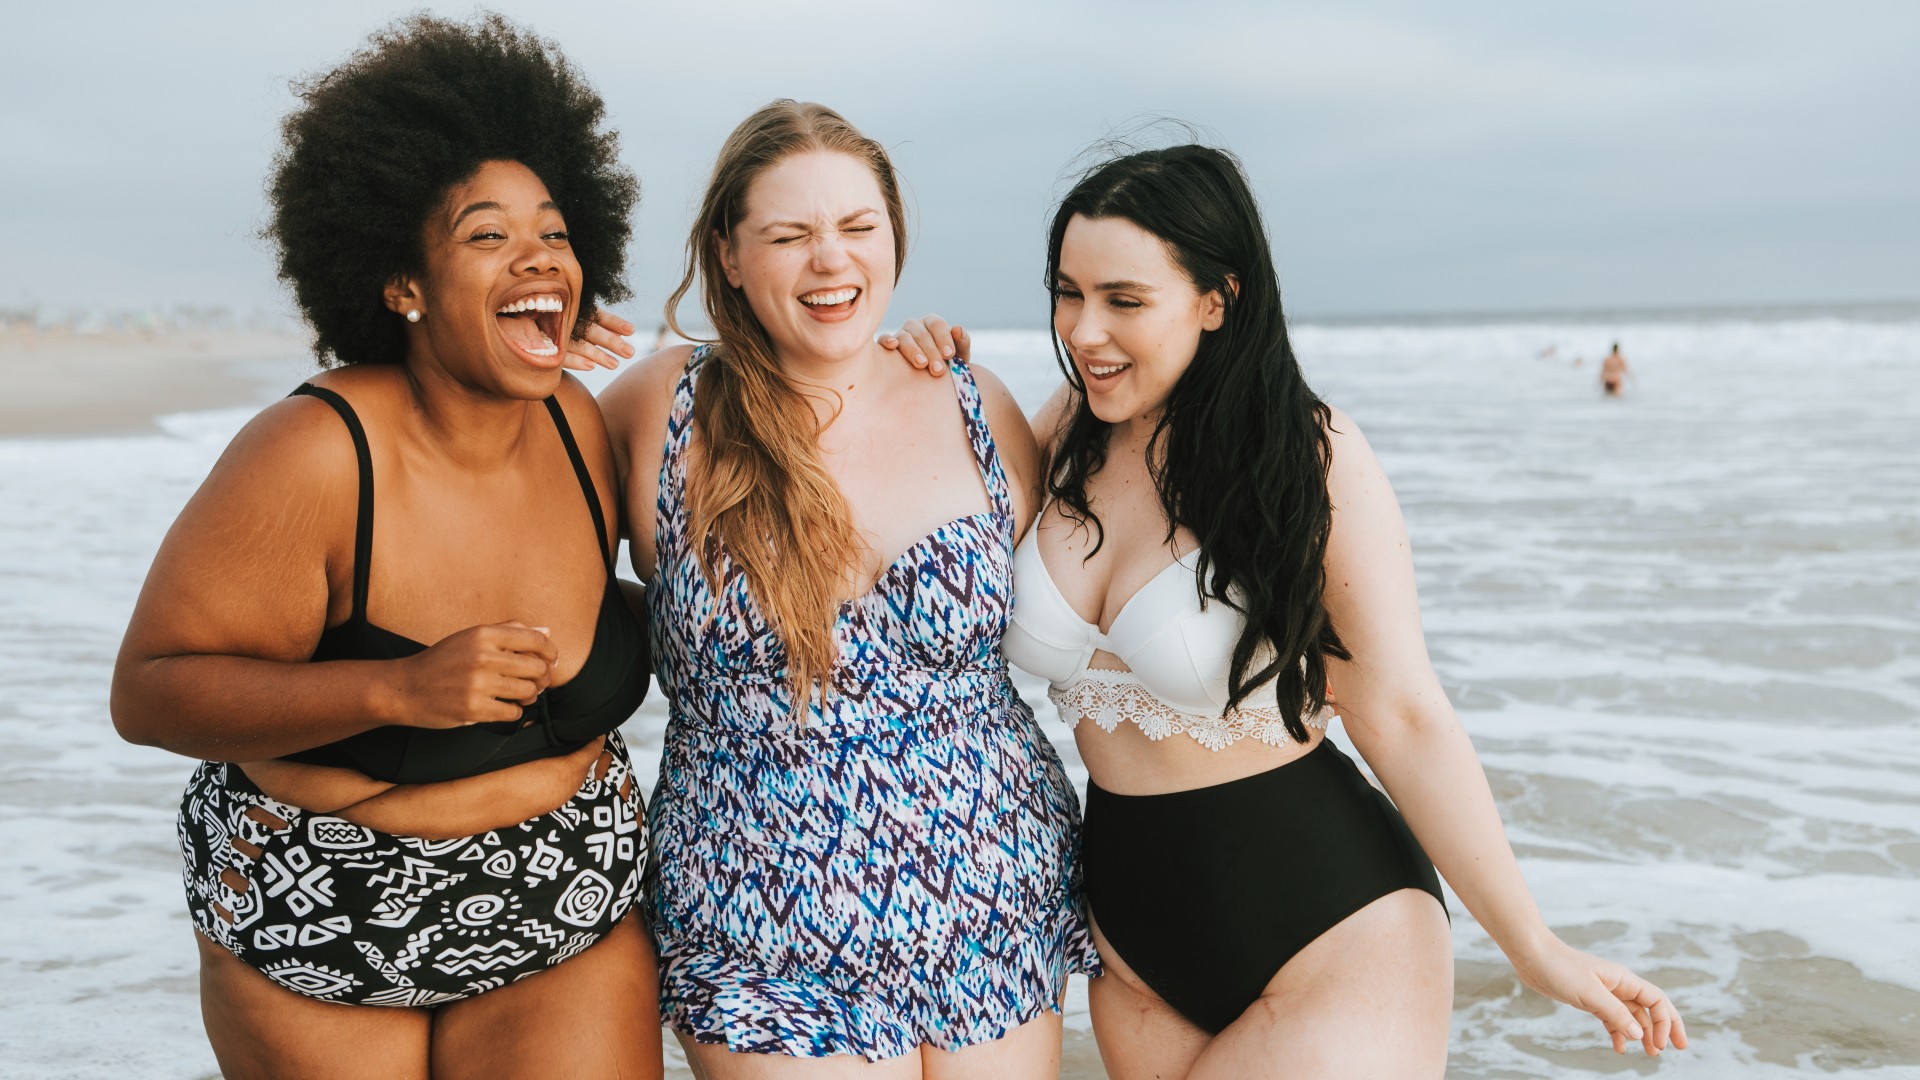 The Best Bathing Suits for Every Body Type - Flattering Swimwear Styles